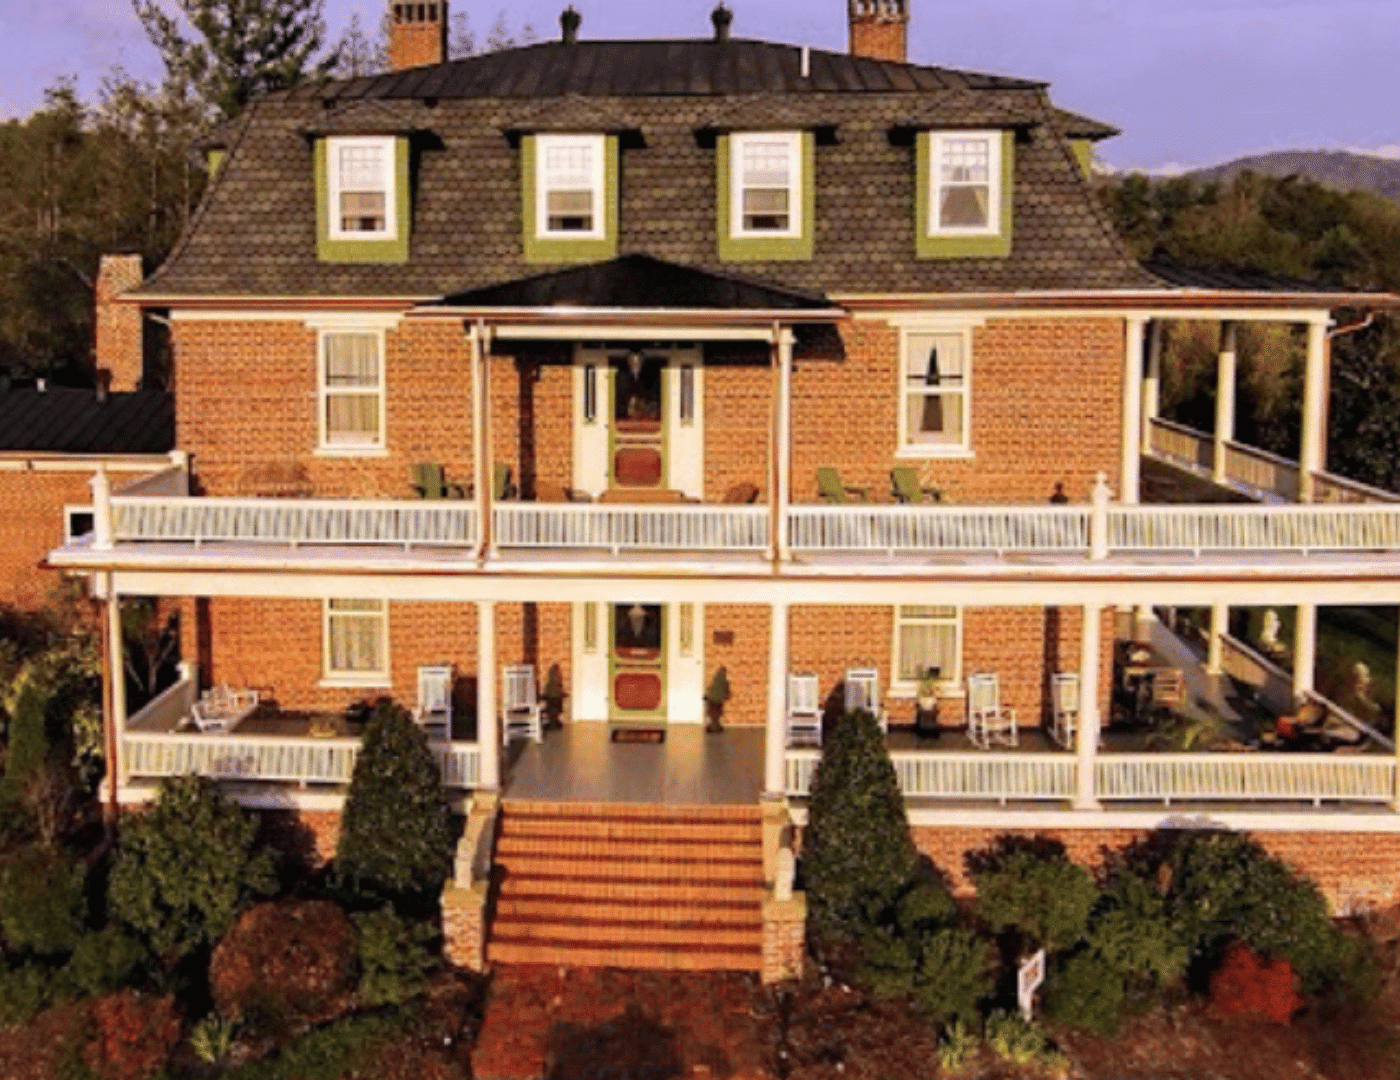 drone photo of 3-story brick B&B with wrap around porches and mansard roof